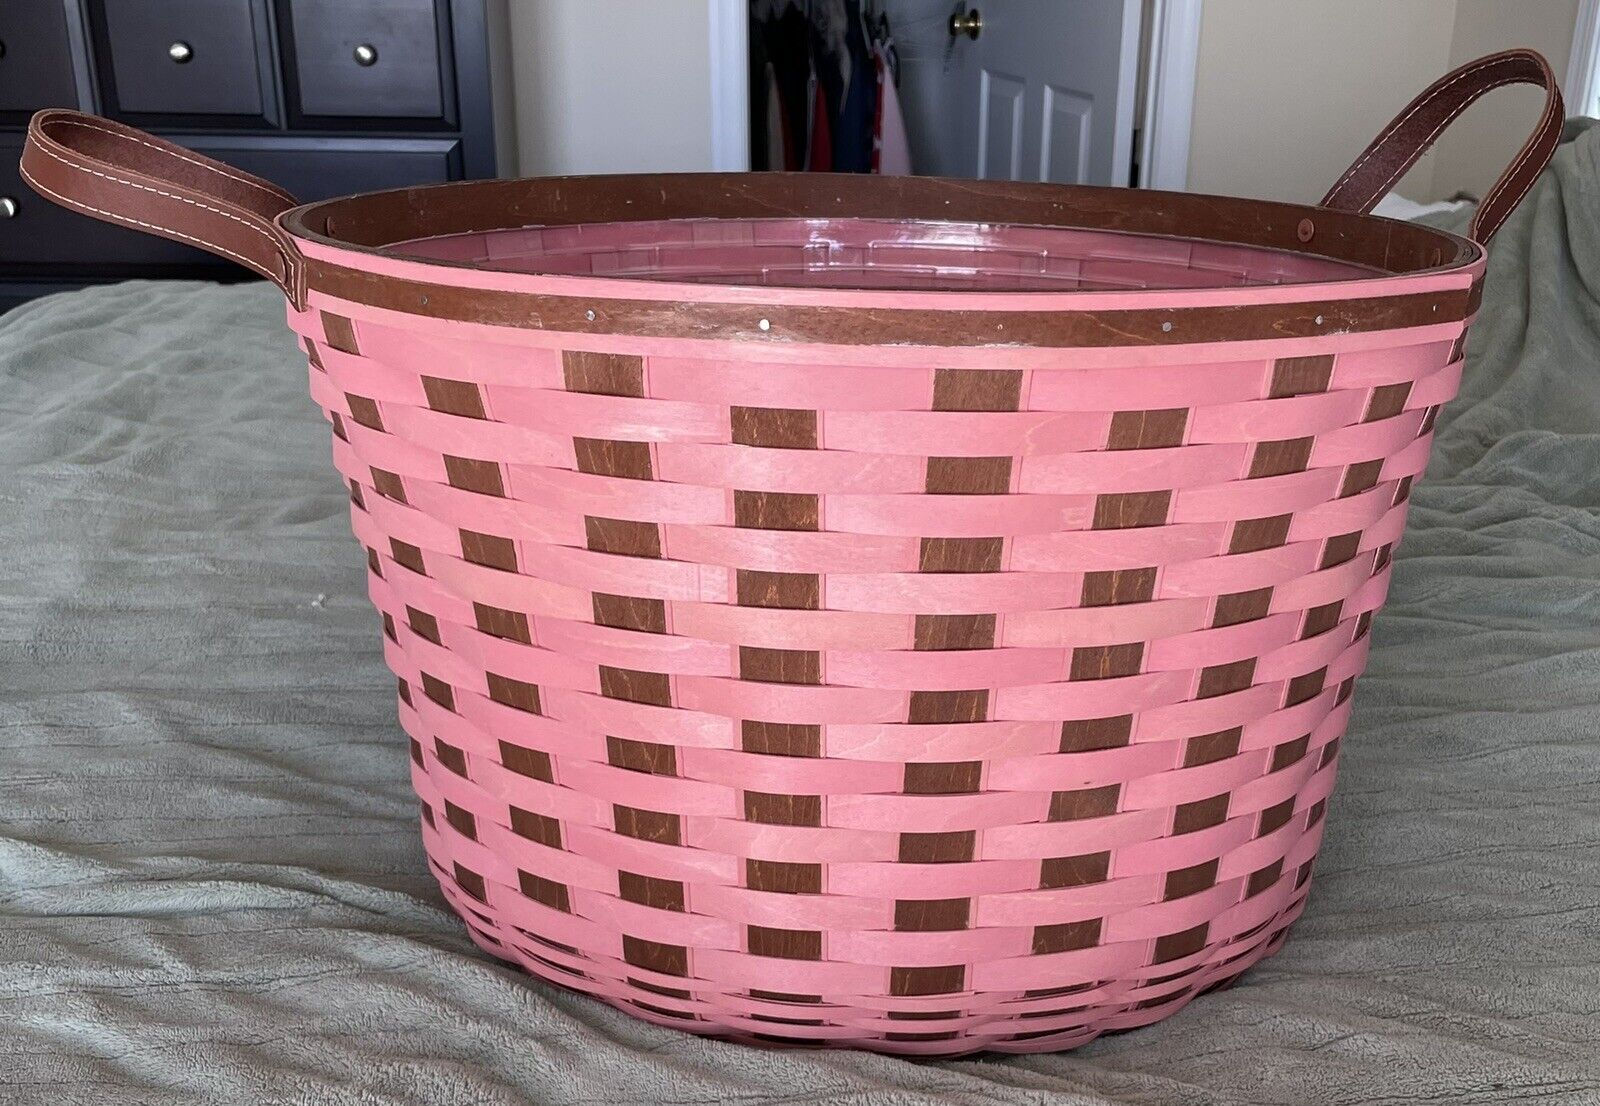 Rare 2010 Longaberger Large Round Laundry Basket Pink And Brown W/ Liner